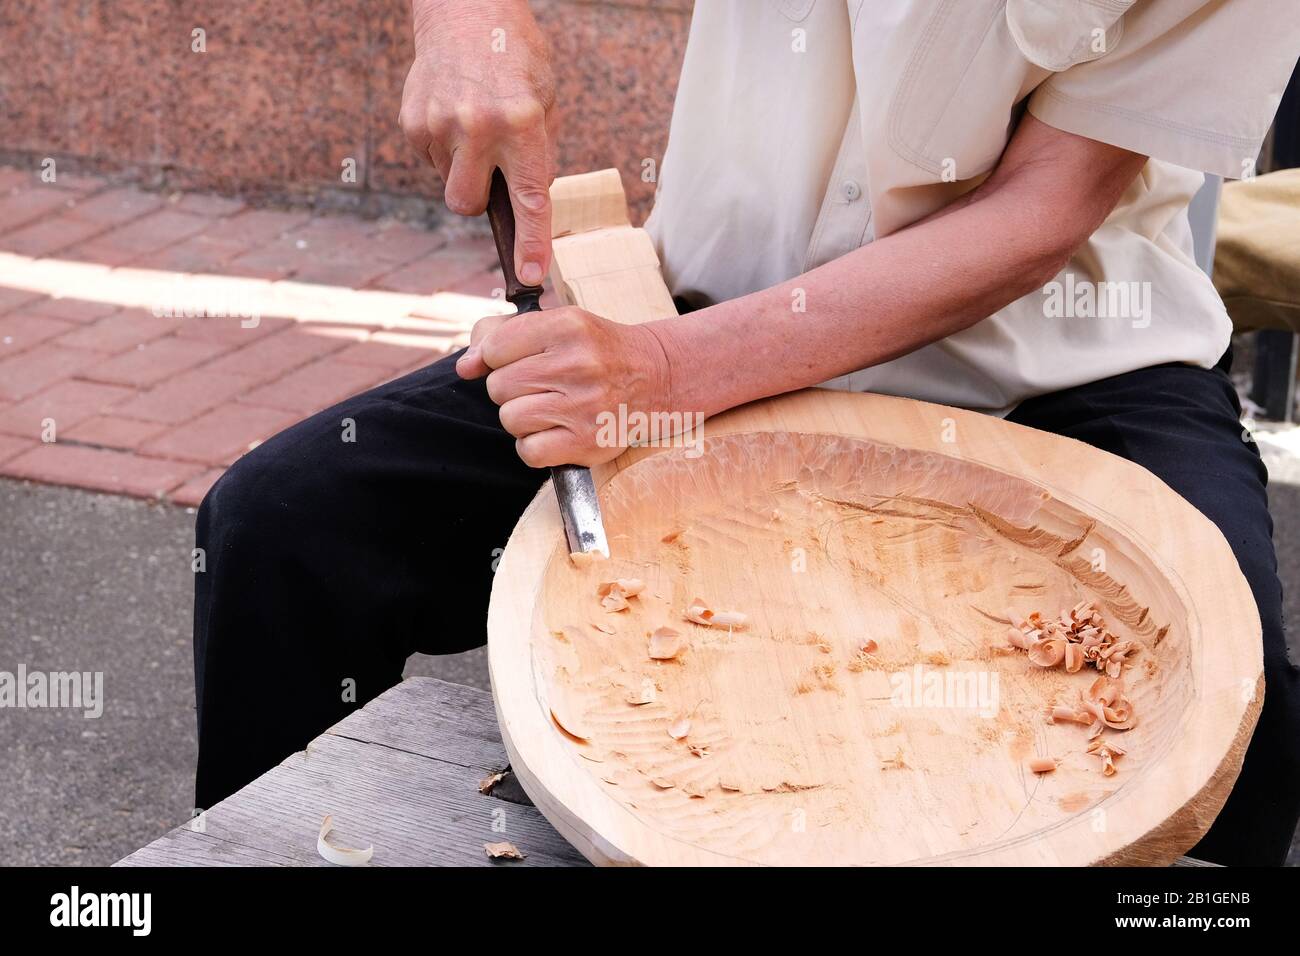 Wood carving. Professional carpenter is carving wood crafts using a woodworking tool, hands close up. Carpentry and craftsmanship concept. Stock Photo